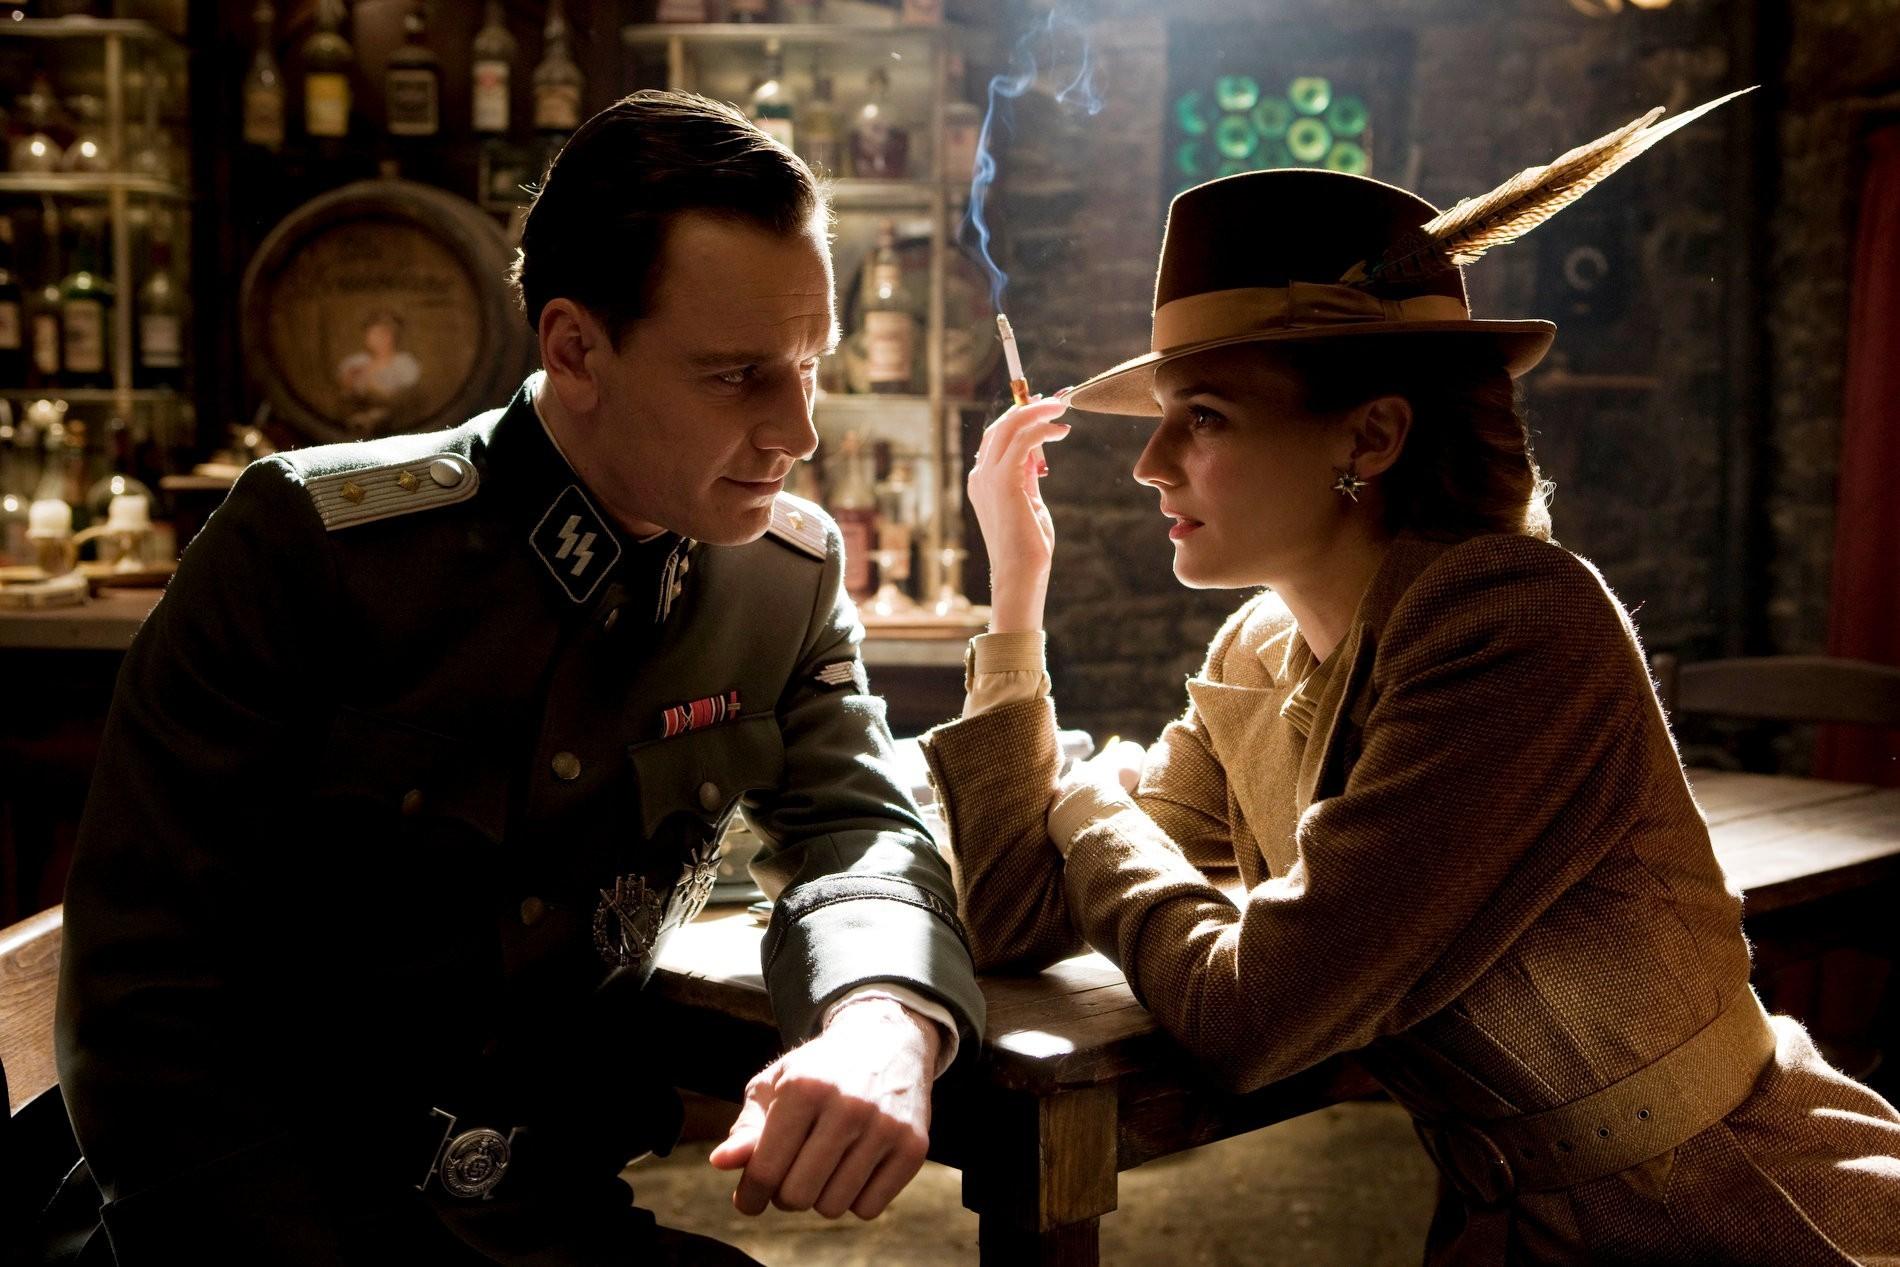 Michael Fassbender and Diane Kruger in Inglorious Basterds.